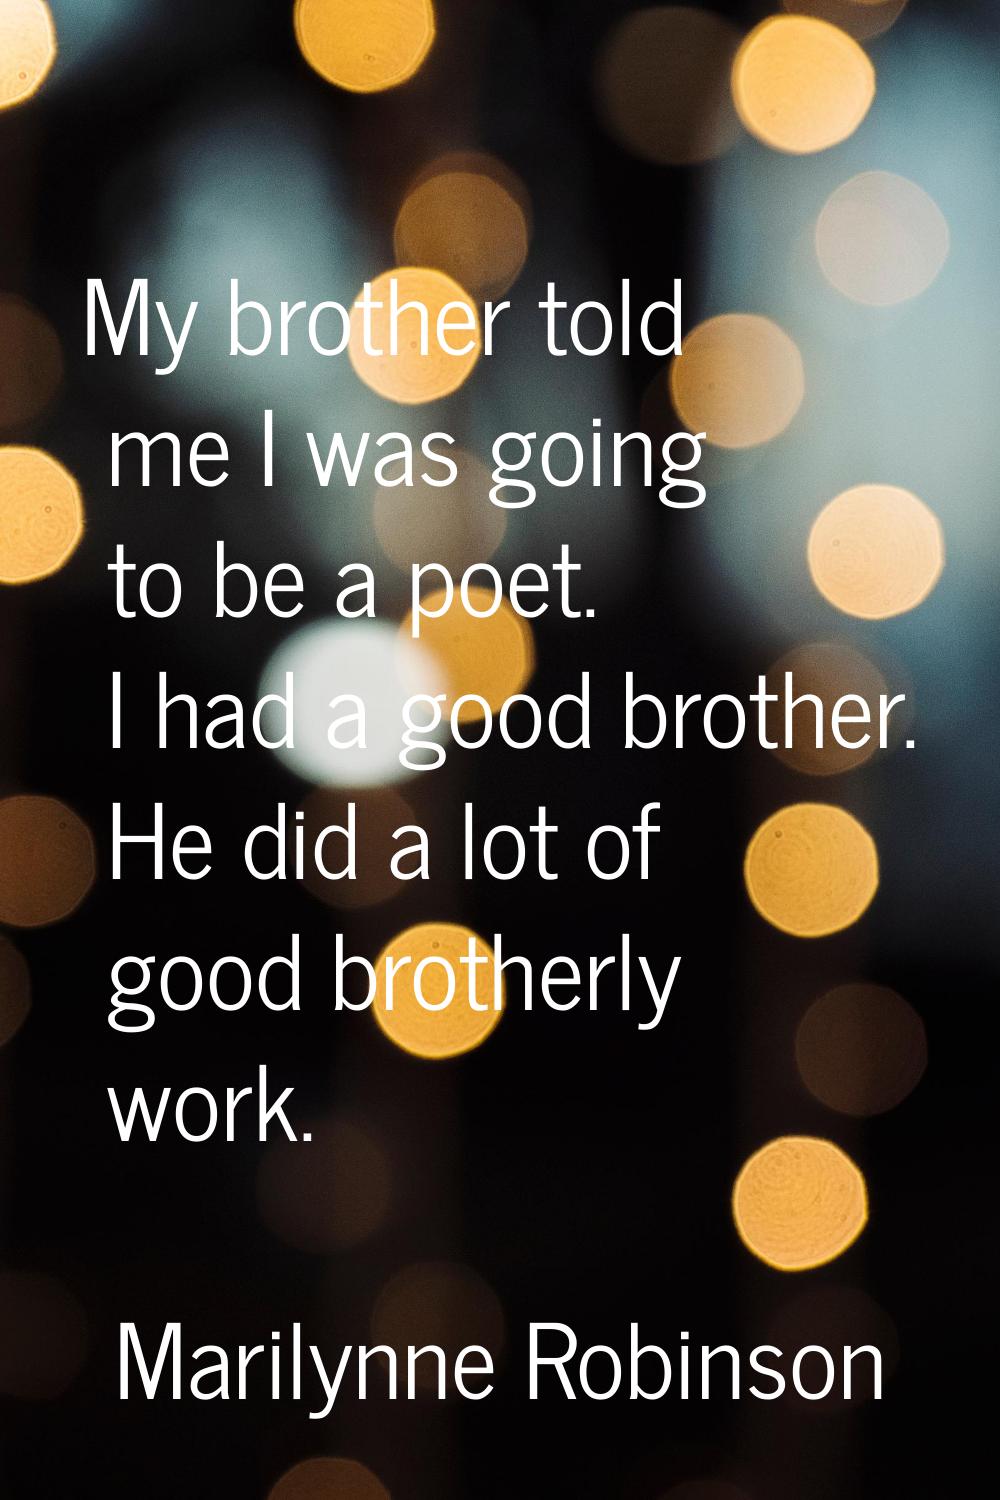 My brother told me I was going to be a poet. I had a good brother. He did a lot of good brotherly w